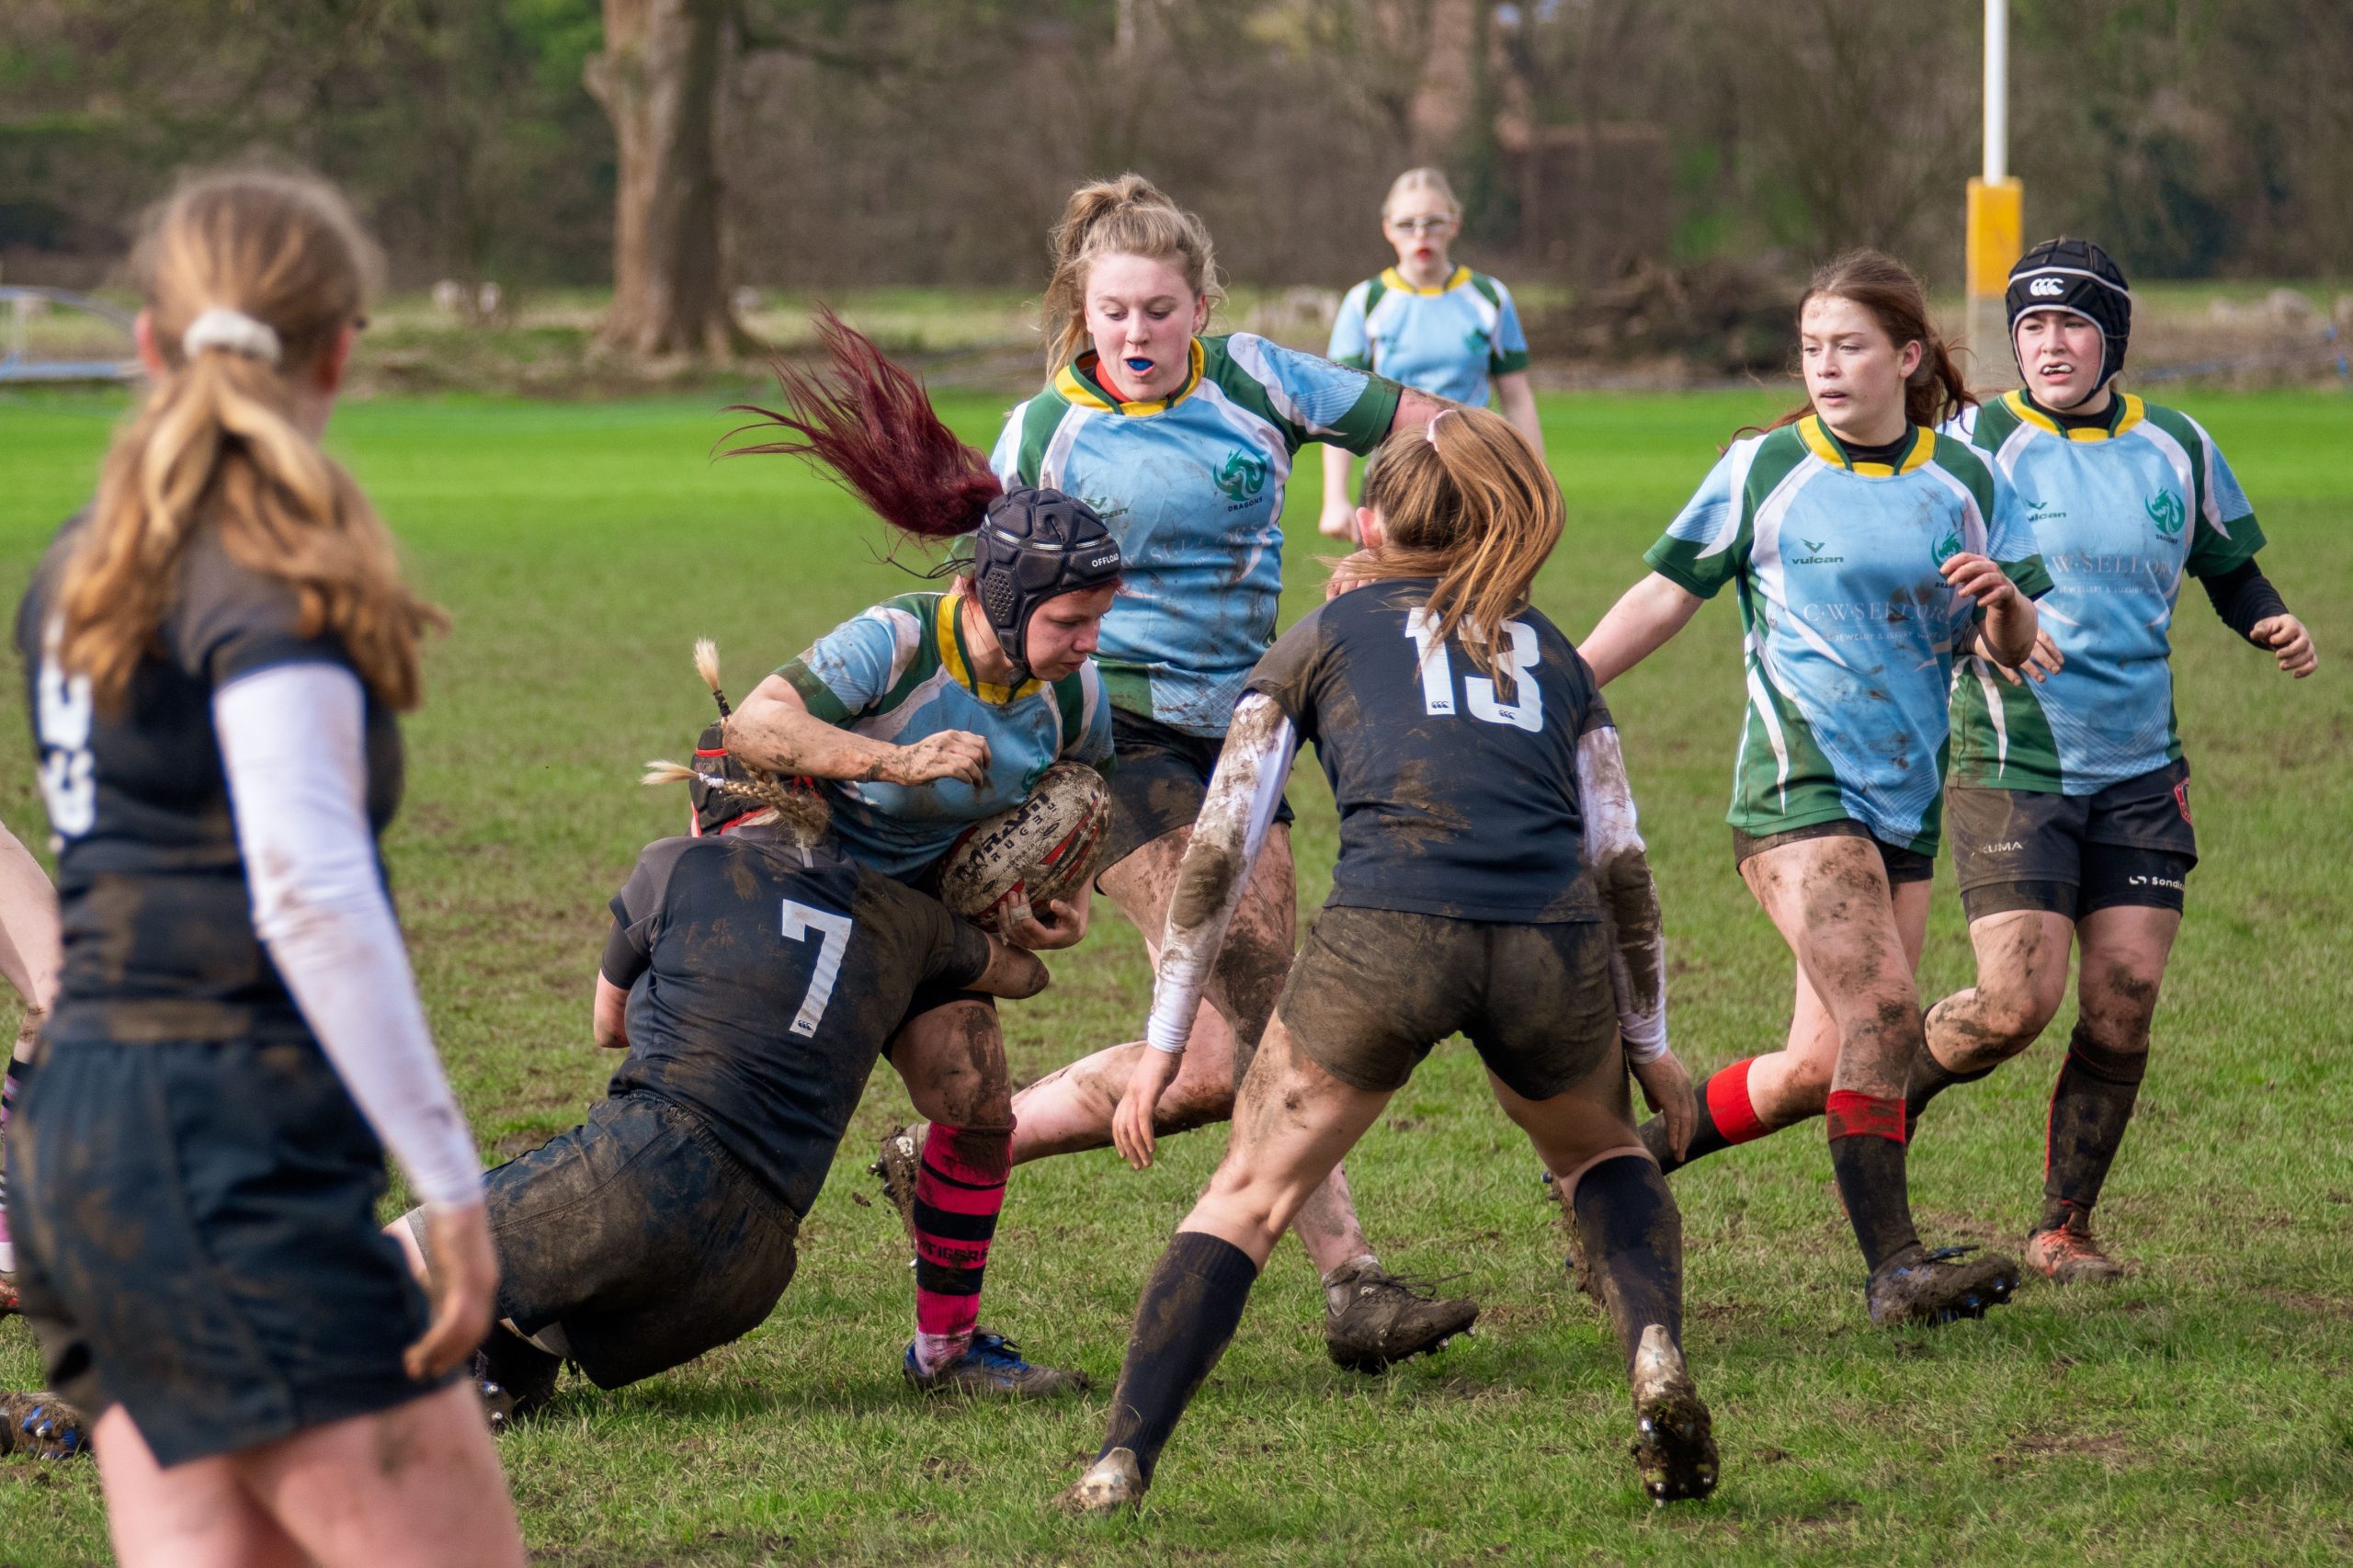 Girls’ Rugby